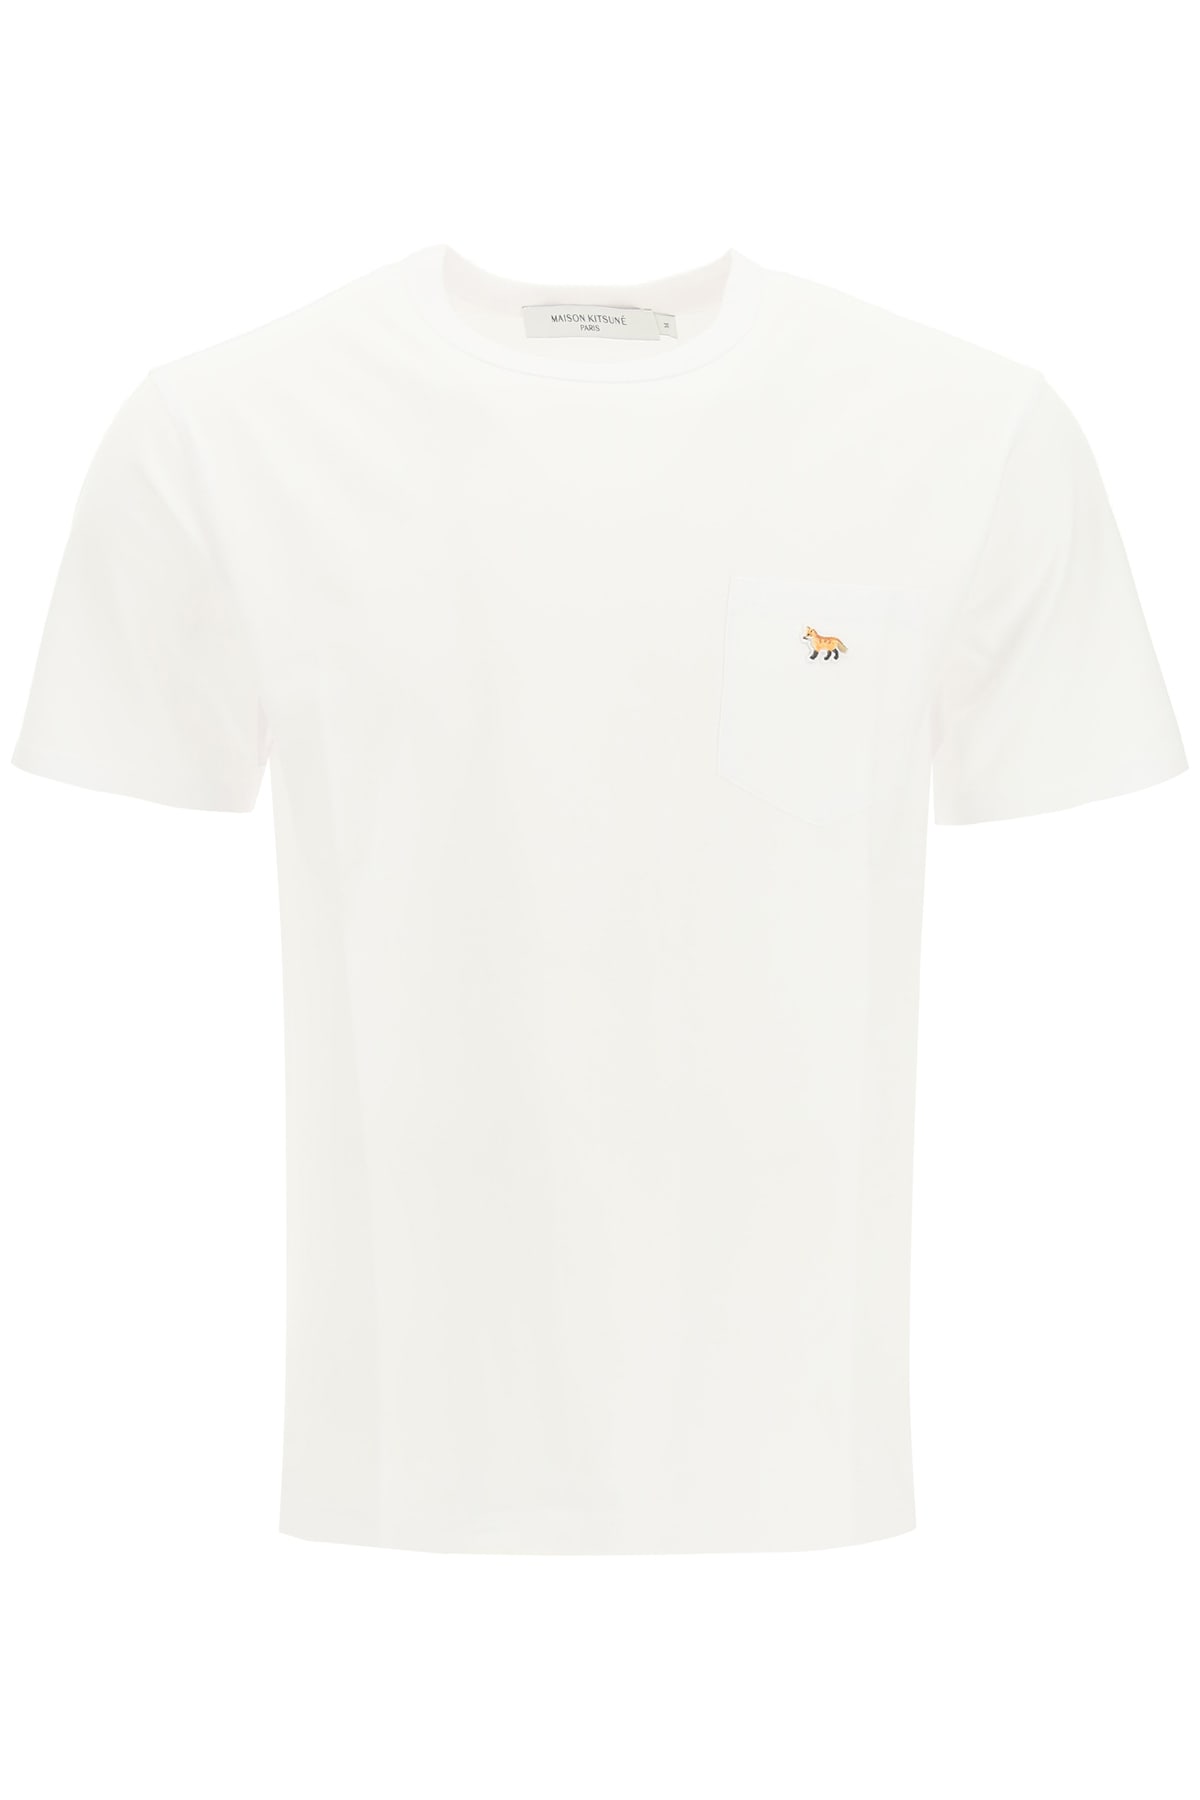 Maison Kitsuné T-shirt With Pocket And Baby Fox Patch